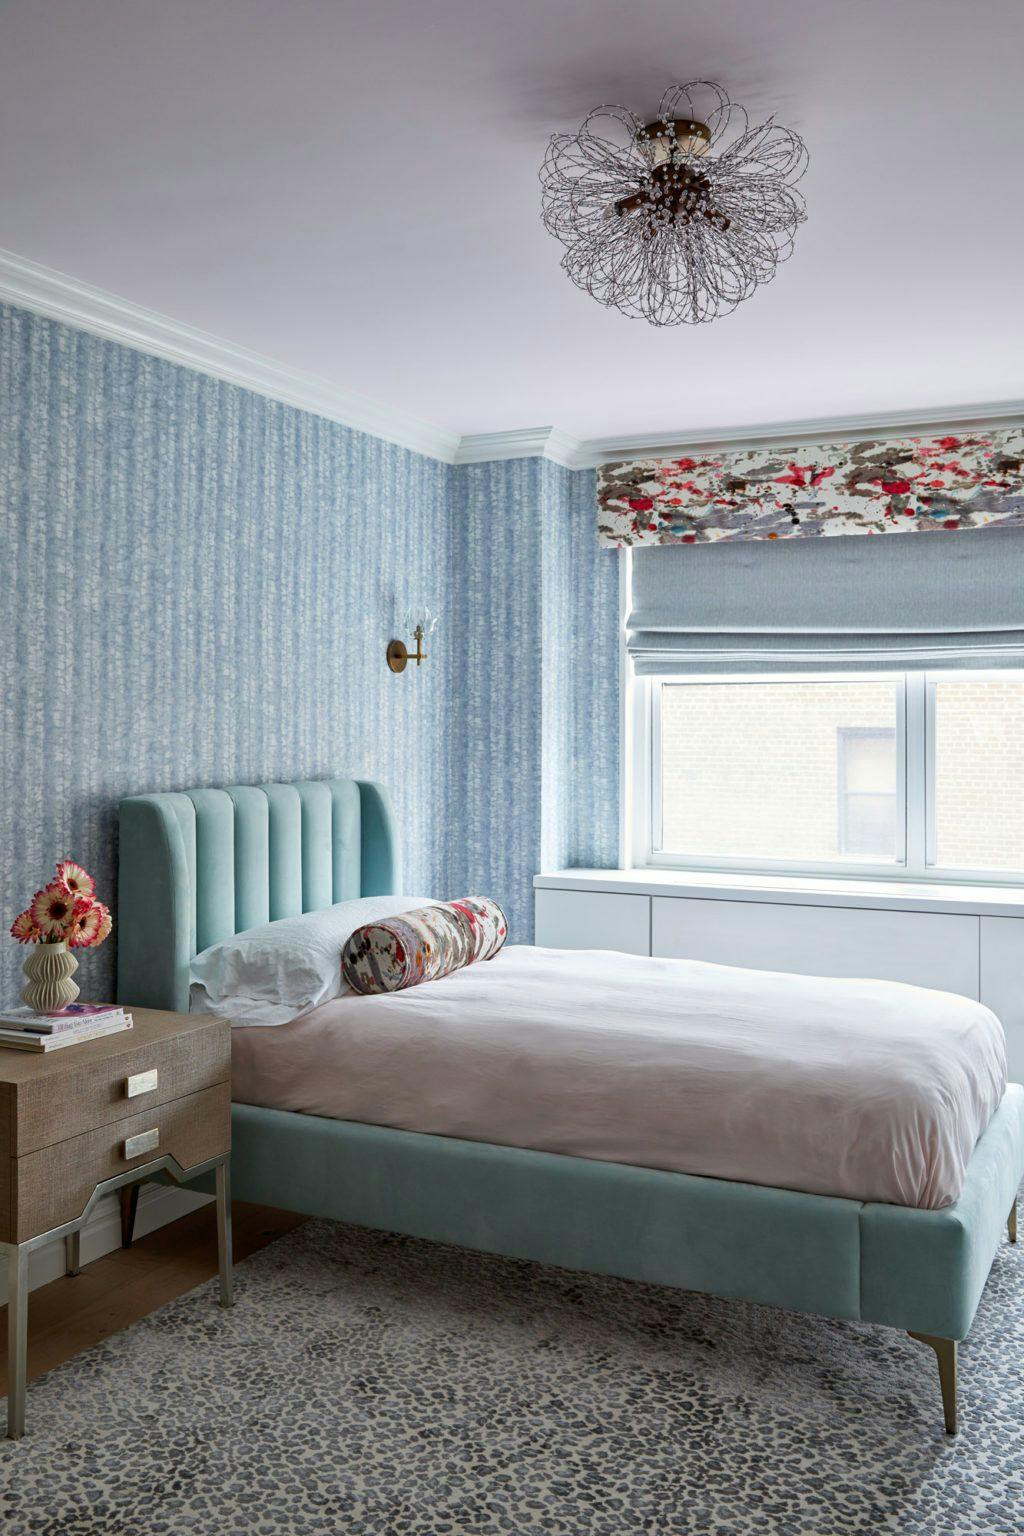 70th street bedroom with blue accents